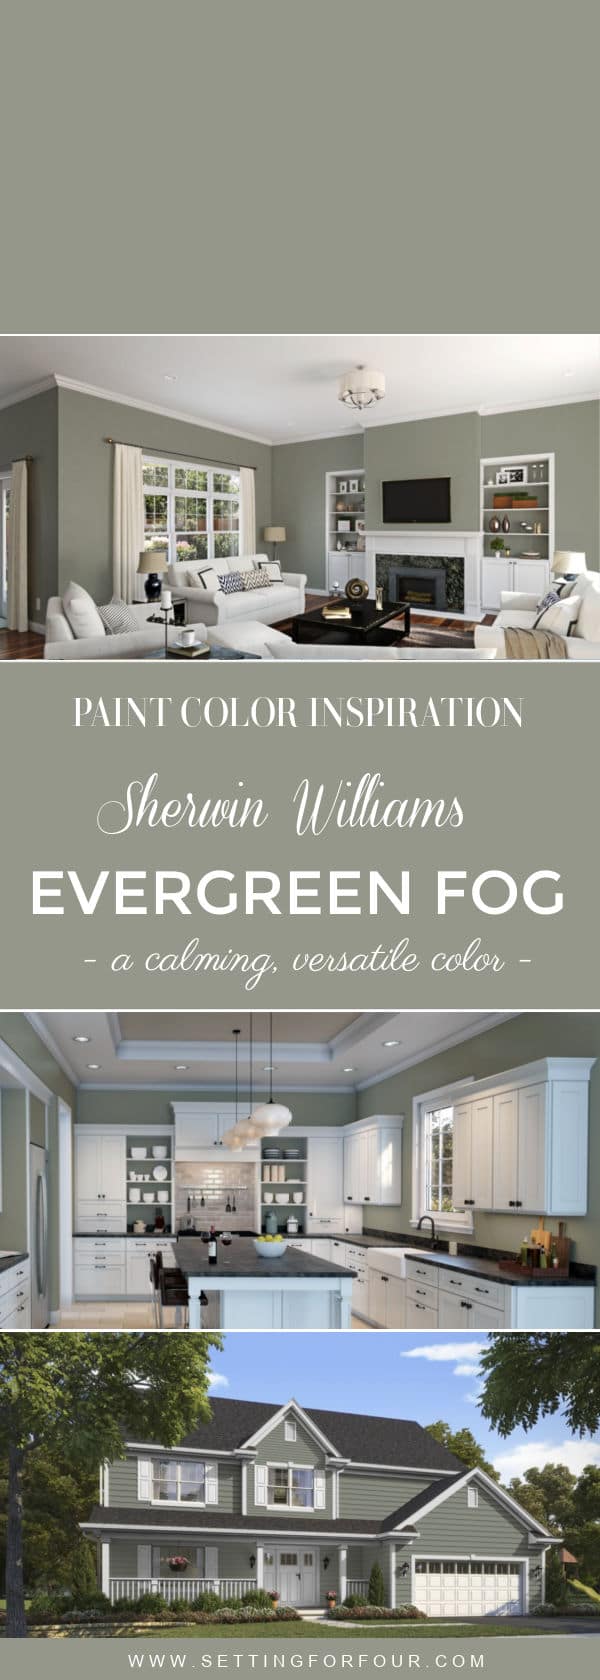 SW Evergreen Fog Color Of The Year 2022 - undertones, coordinating colors and photos in real rooms!